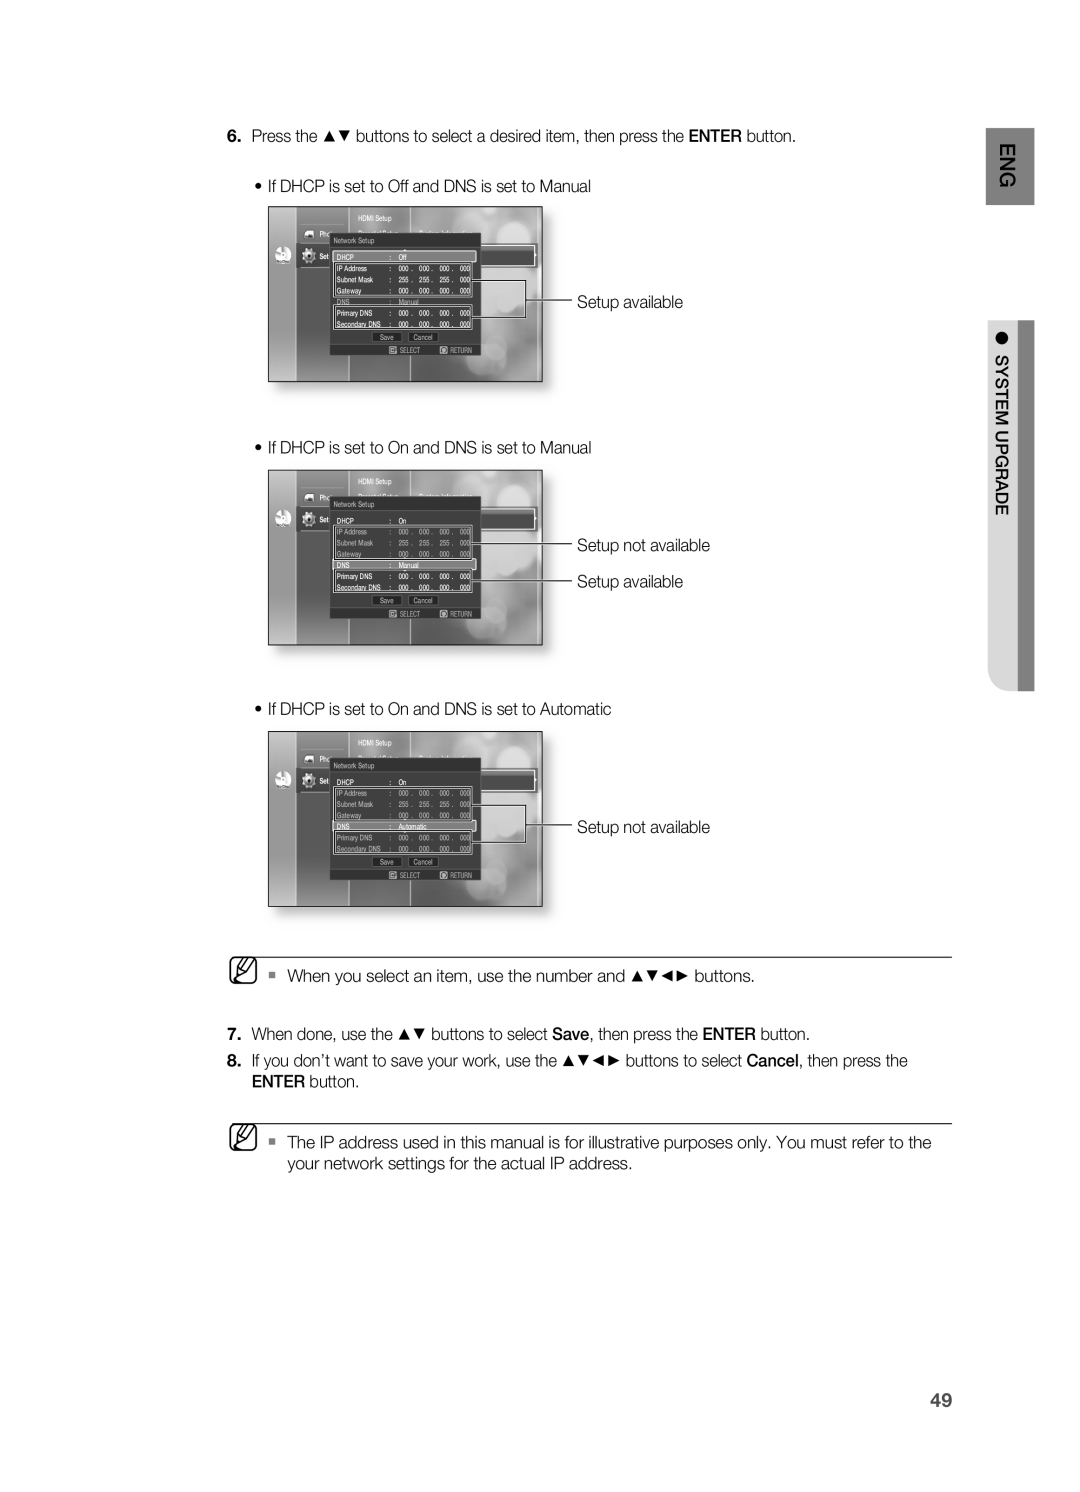 Samsung AH68-02019S manual •If DHCP is set to Off and DNS is set to Manual 